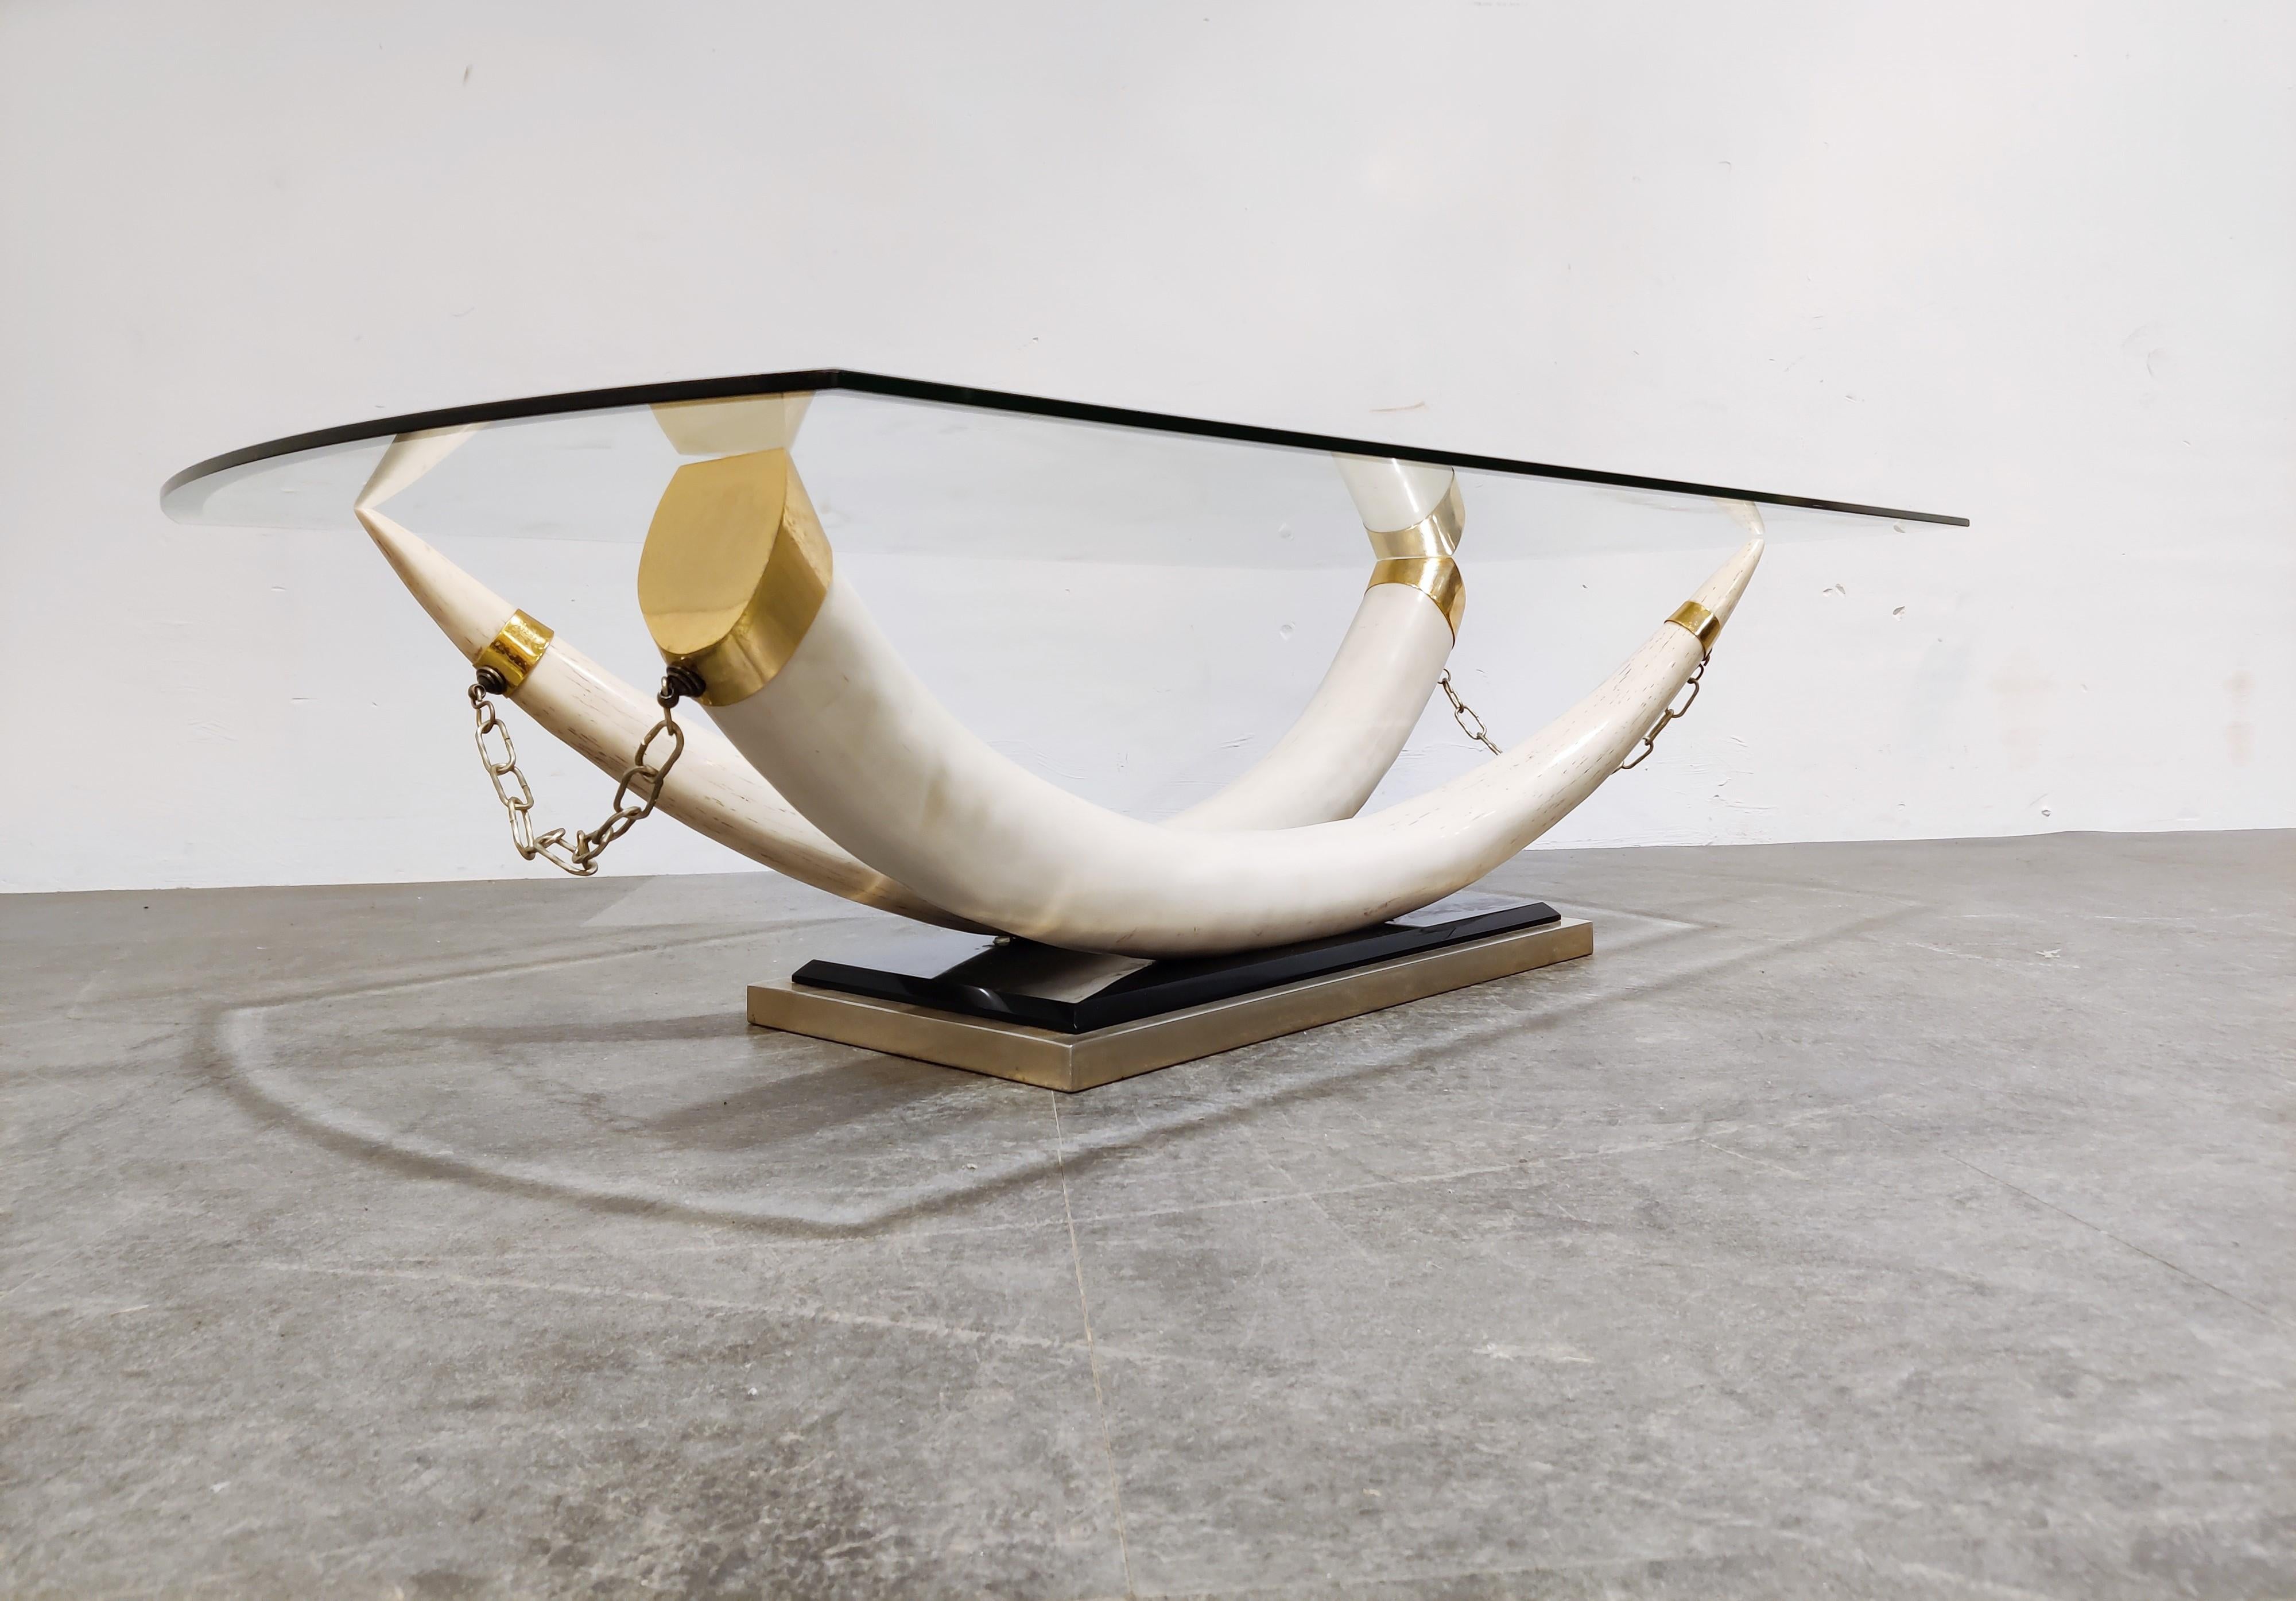 Striking vintage faux tusk coffee table.

The resemblance with real ivory is very close, and the tusks are made of resine with brass ends mounted on a brass and lacquered base.

Original beveled glass top

1980s - Italy

Good